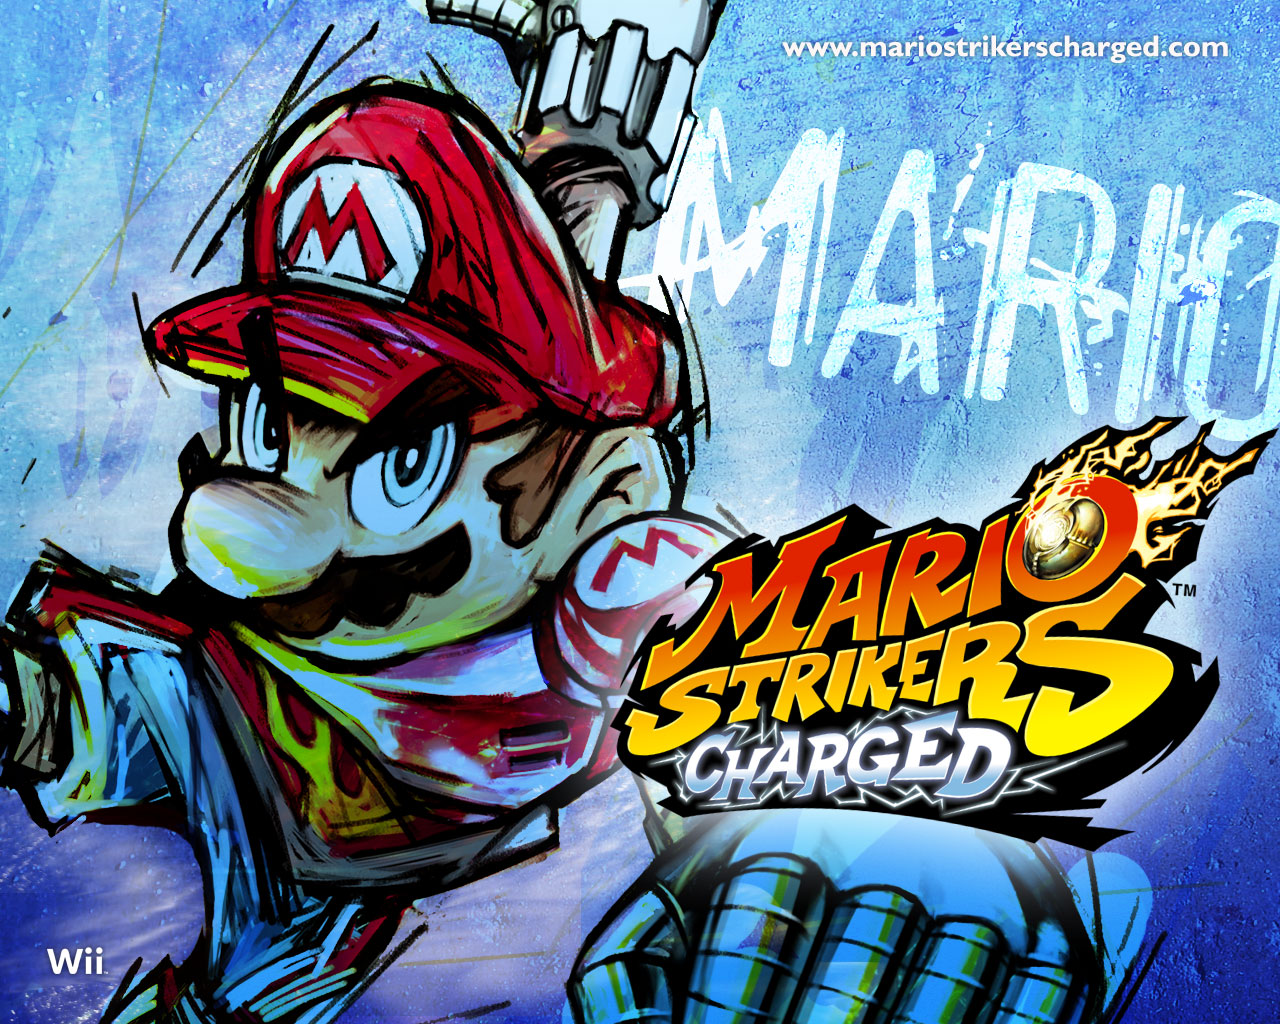 Mario Strikers Charged #23